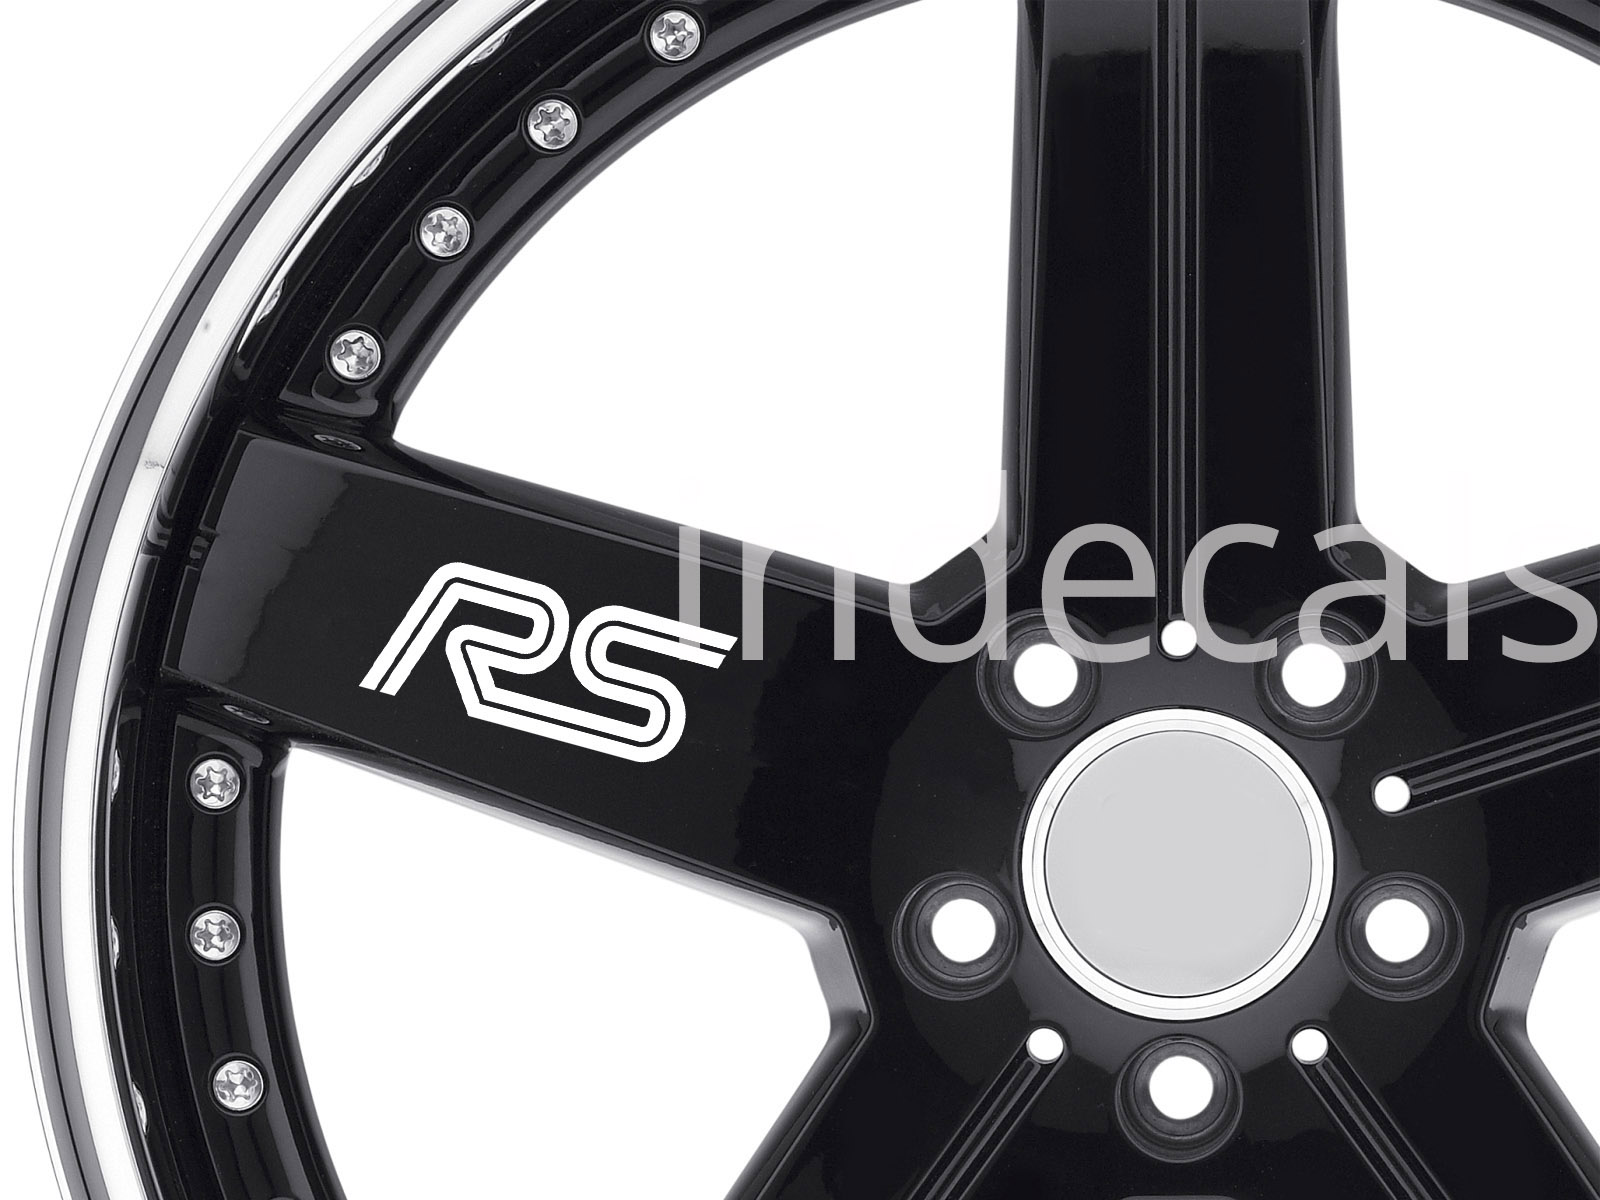 6 x Ford RS Stickers for Wheels - White